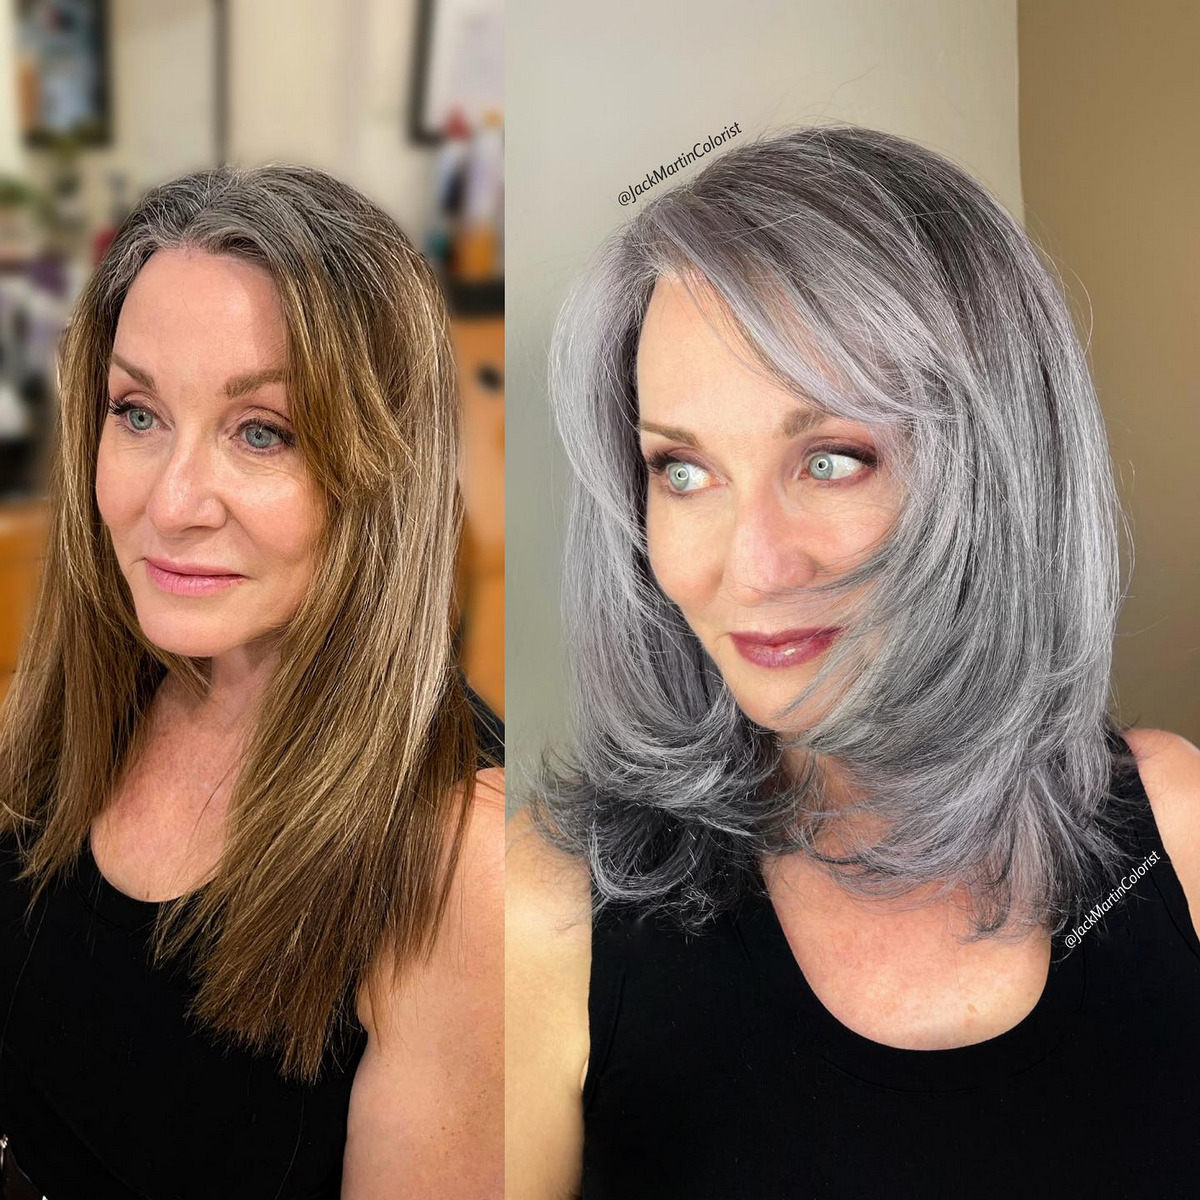 From Artificial Dye to Natural Gray Hair